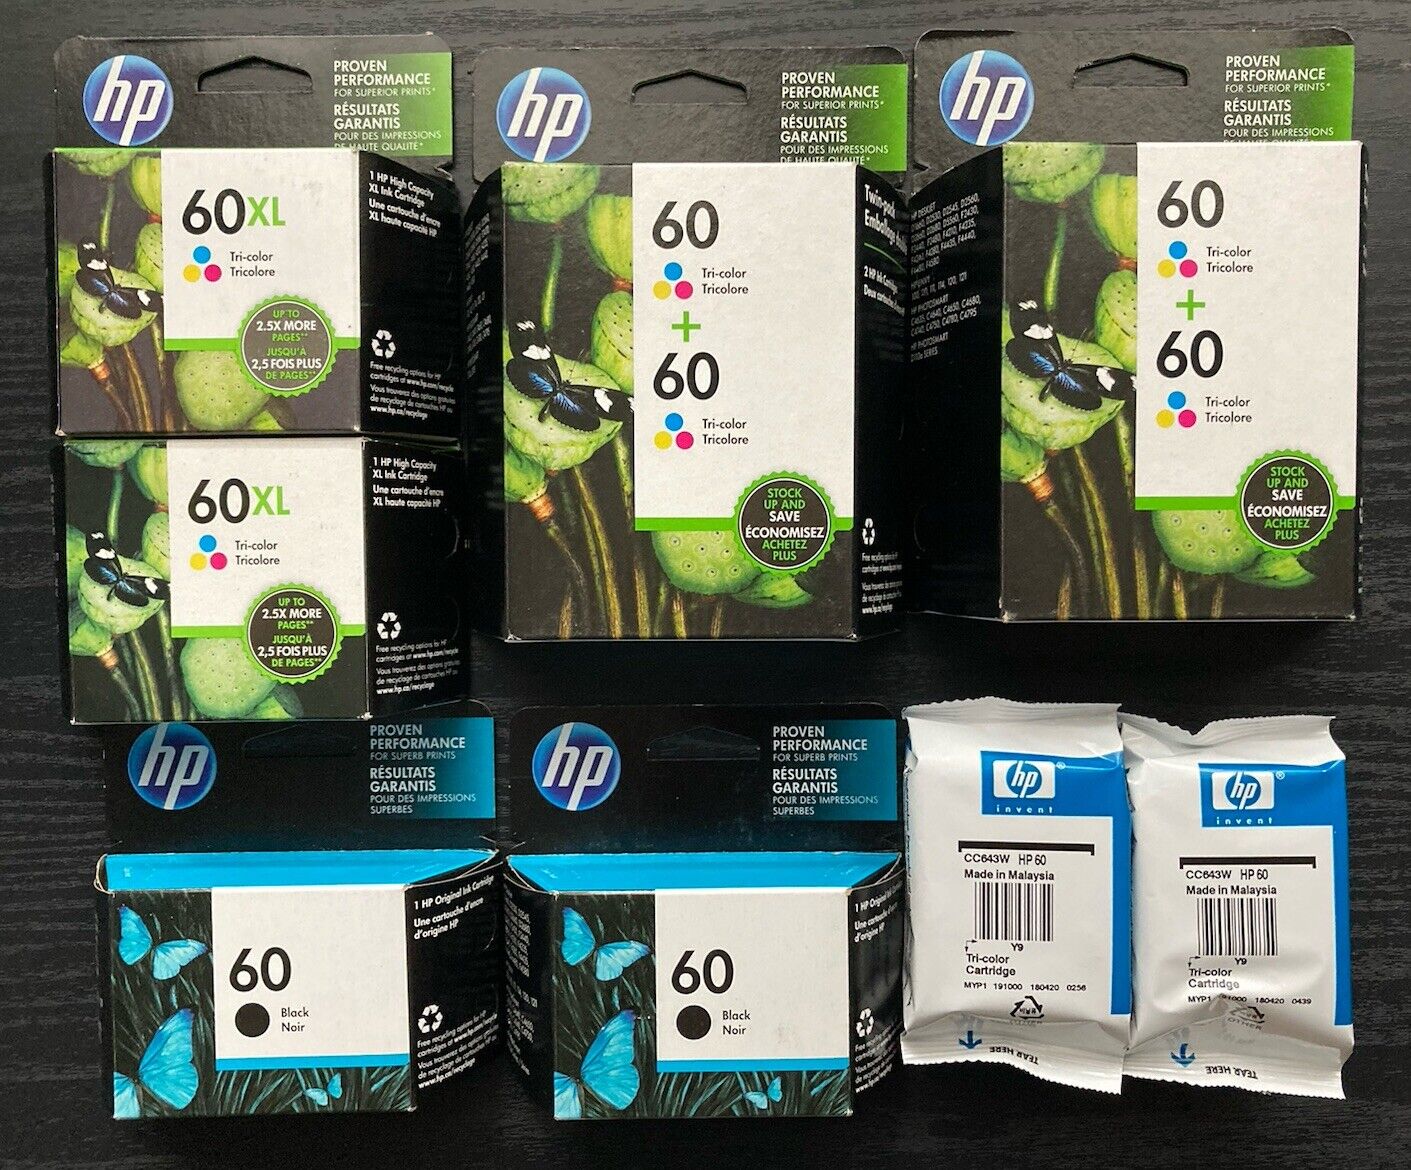 Lot of 10 GENUINE HP 60XL Ink Cartridge Black Tri-Color 60 Sealed Expired